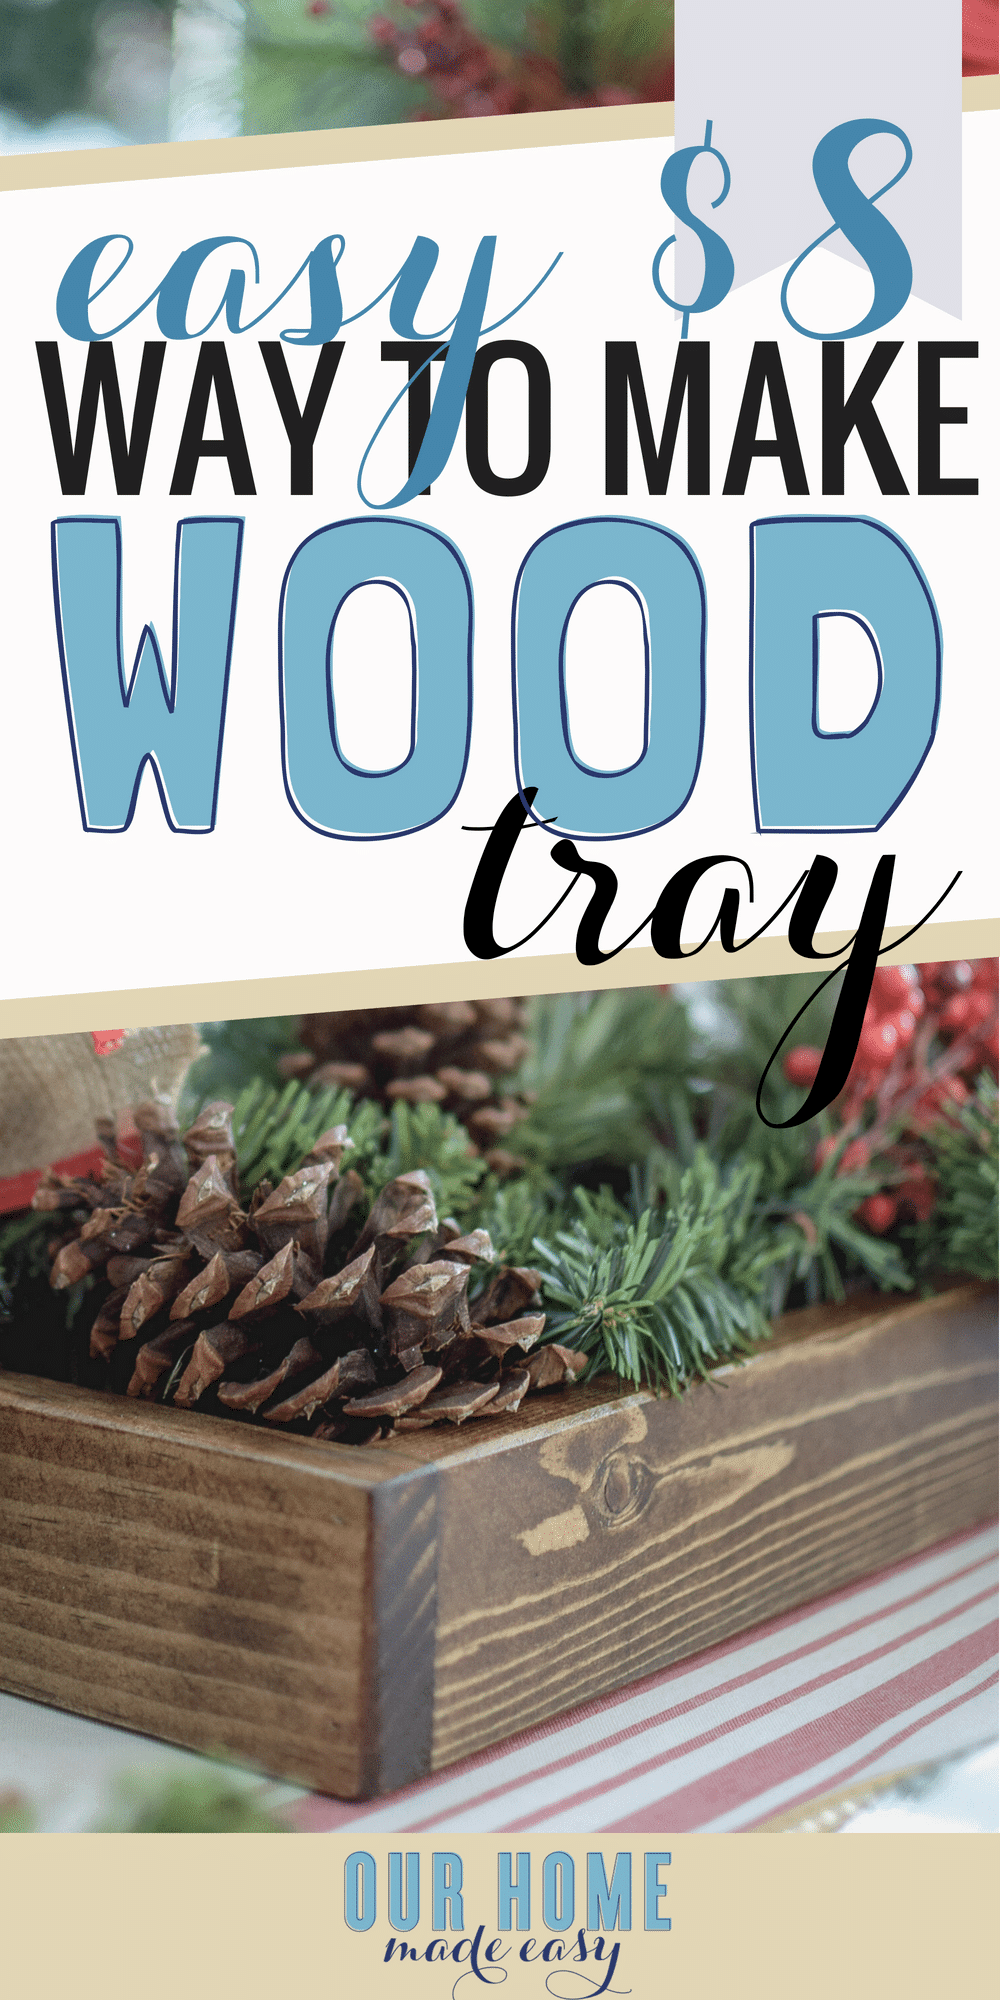 This is the quickest and easy wood tray to make yourself! Total cost is less than $8 and its perfect for beginners! Click to see how to make your own! #diy #woodtray #homedecor